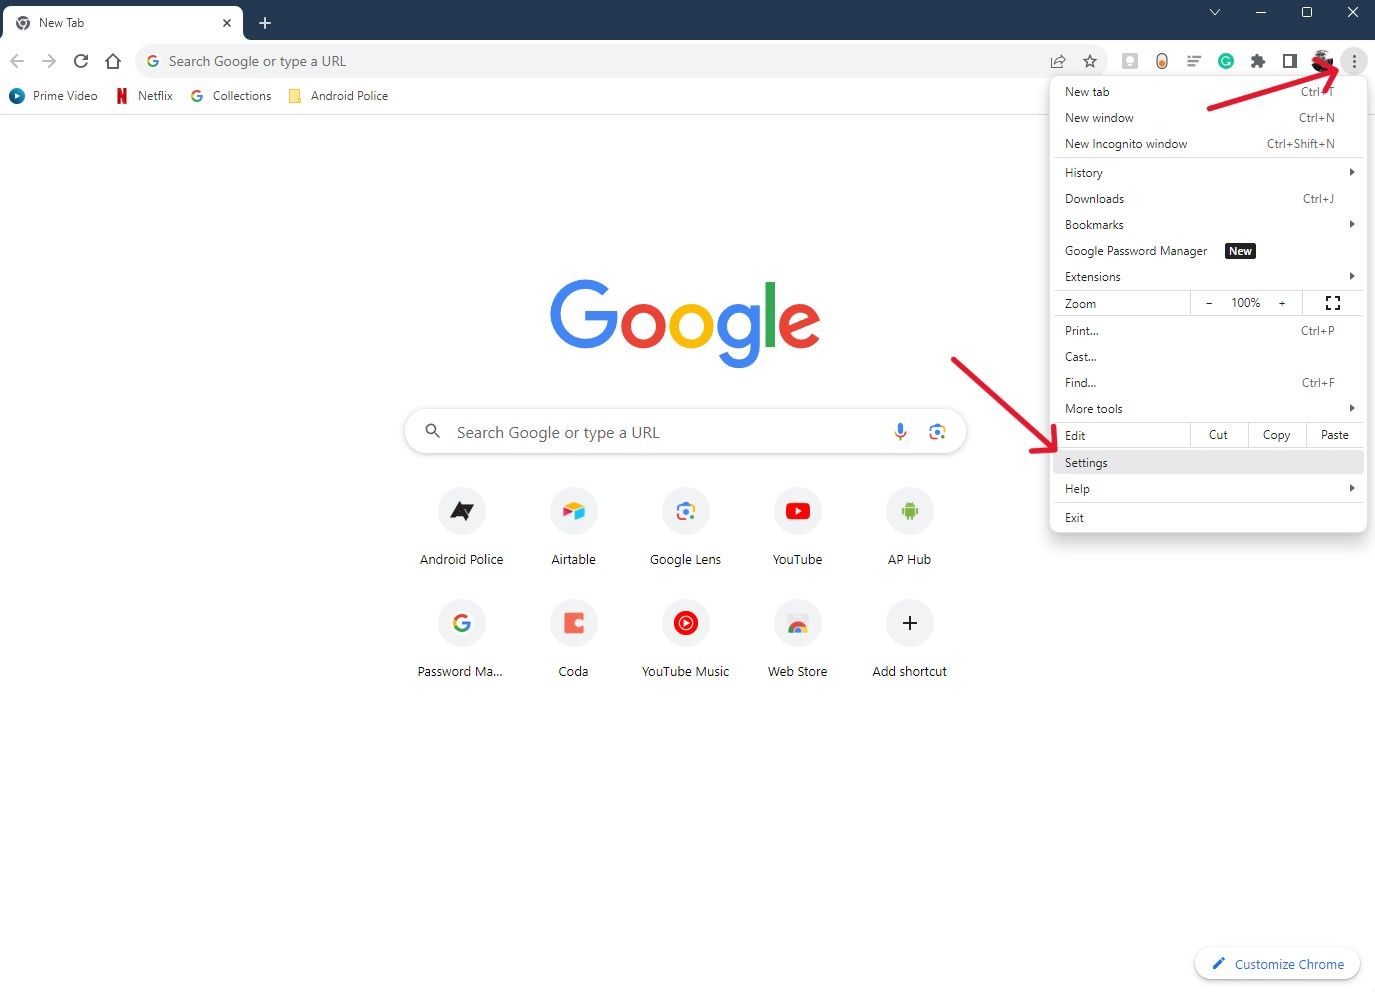 Google Chrome with a red arrow pointing to the three dots and another red arrow pointing to Settings in a drop down menu.